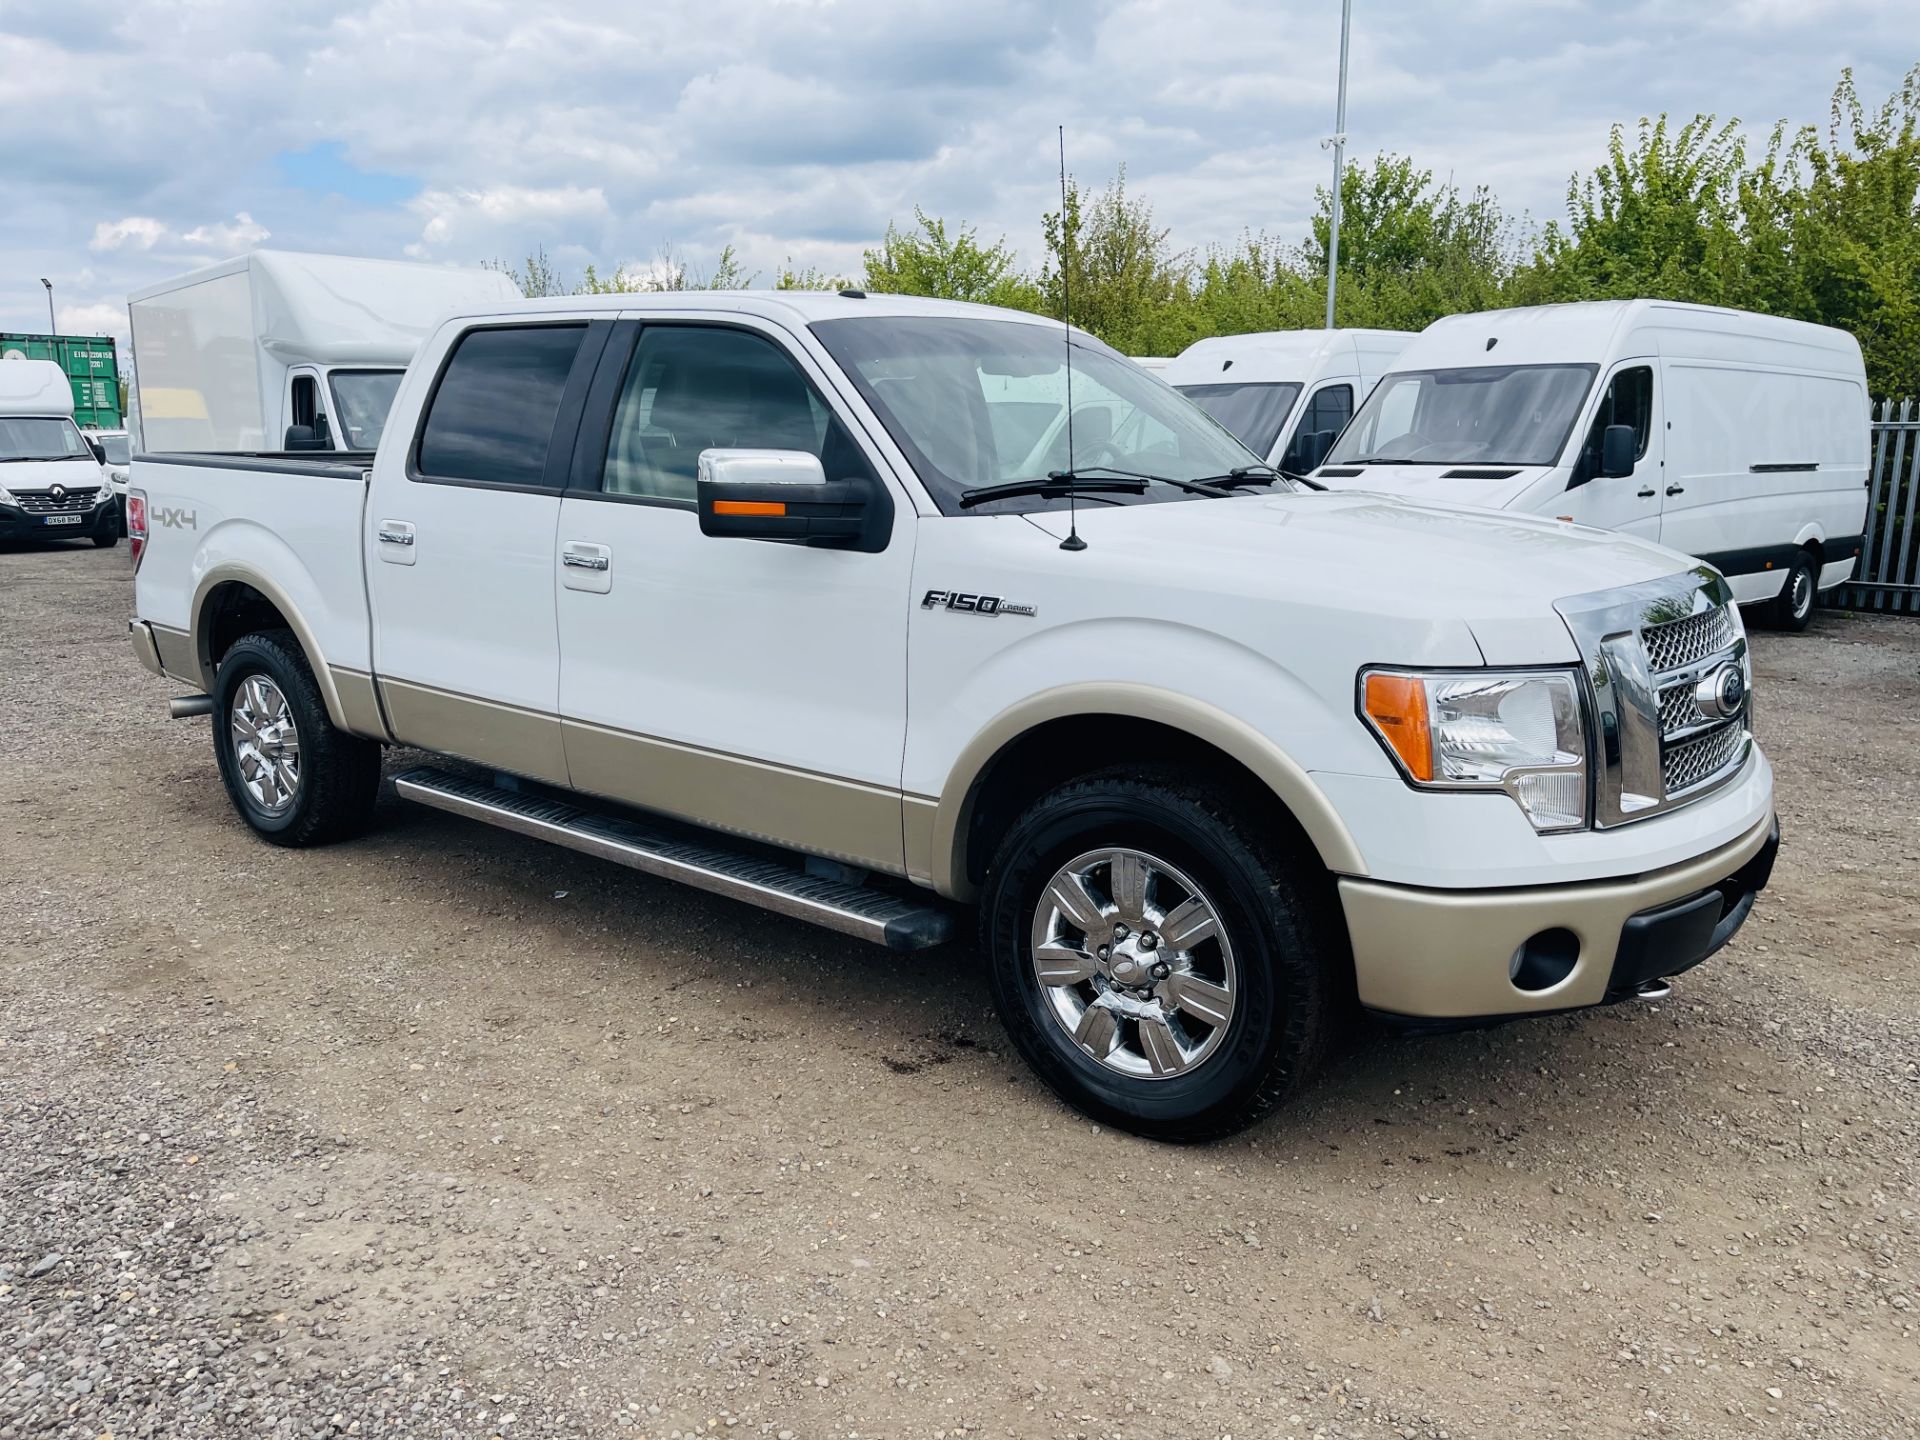 ** ON SALE ** Ford F-150 5.4L V8 Lariat Supercrew 4WD ' 2010 Year' A/C - Full Spec - ULEZ Compliant - Image 14 of 29